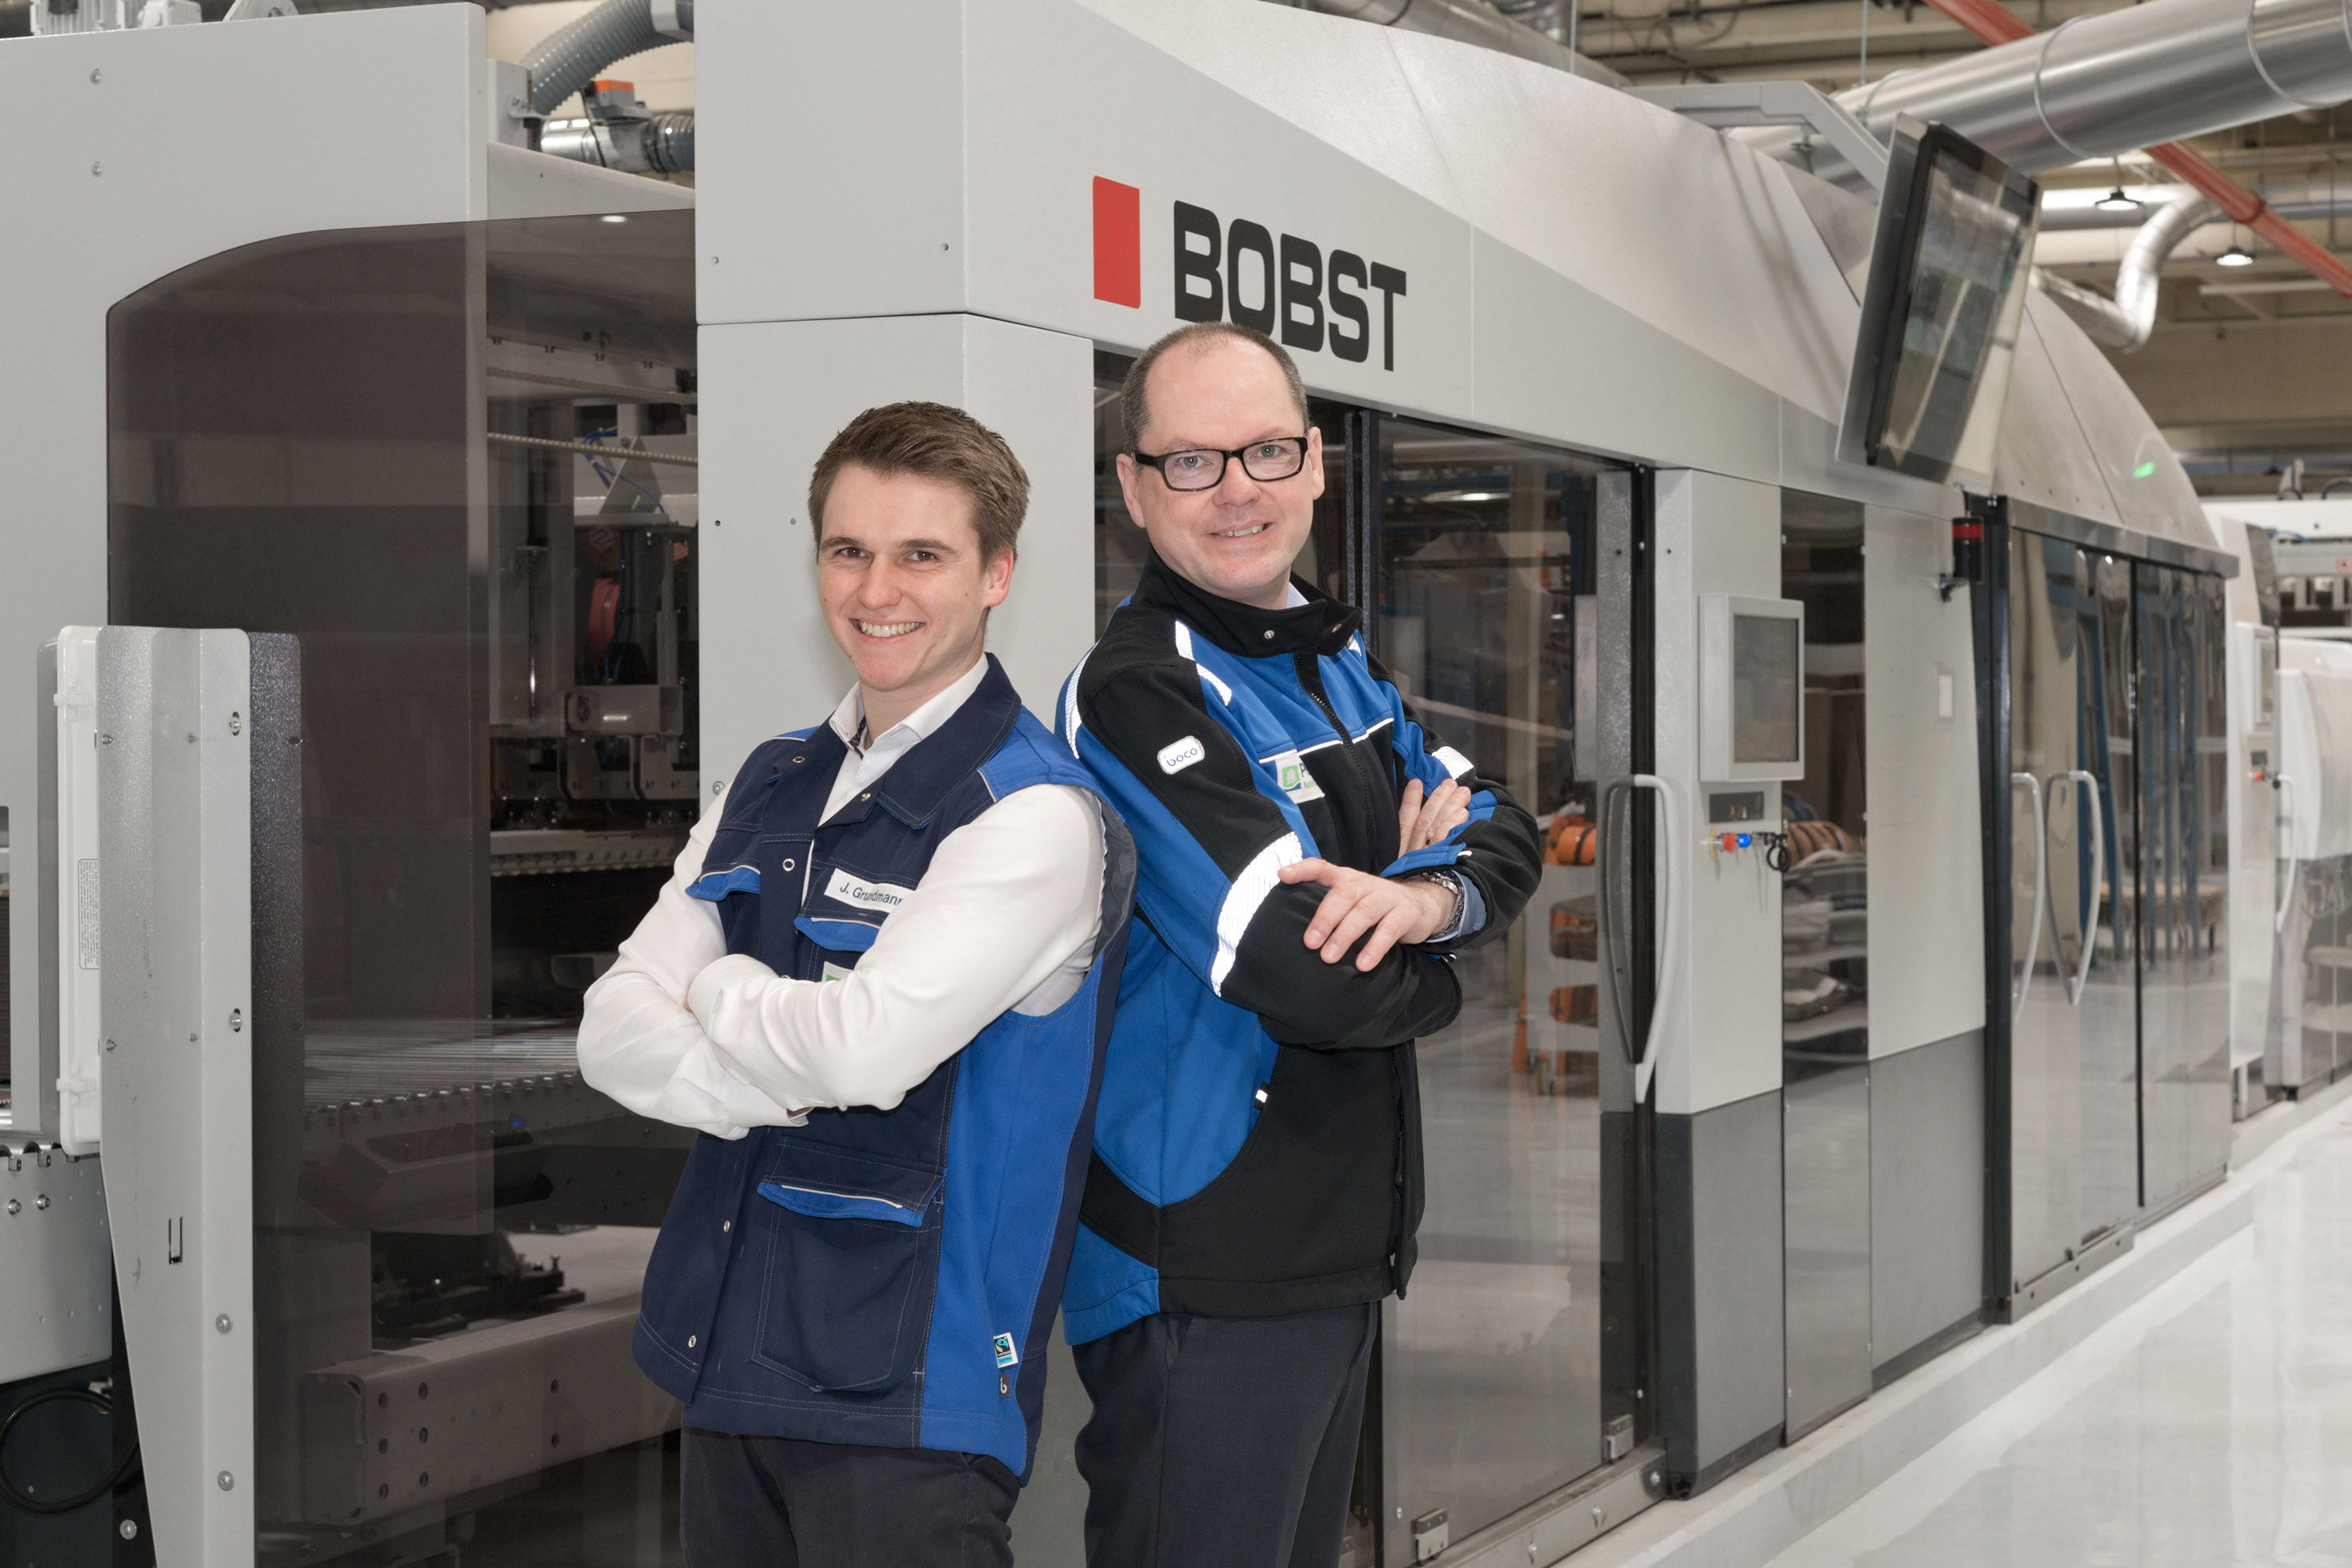 The holistic process optimization strategy devised by CEO Winfried Flemmer and operations manager Jonas Grundmann is moving Wellkistenfabrik Fritz Peters into the future. The high-performance FFG 8.20 BS EXPERTLINE inline machine has played a key role since early 2020, as part of the packaging manufacturer’s lean process.